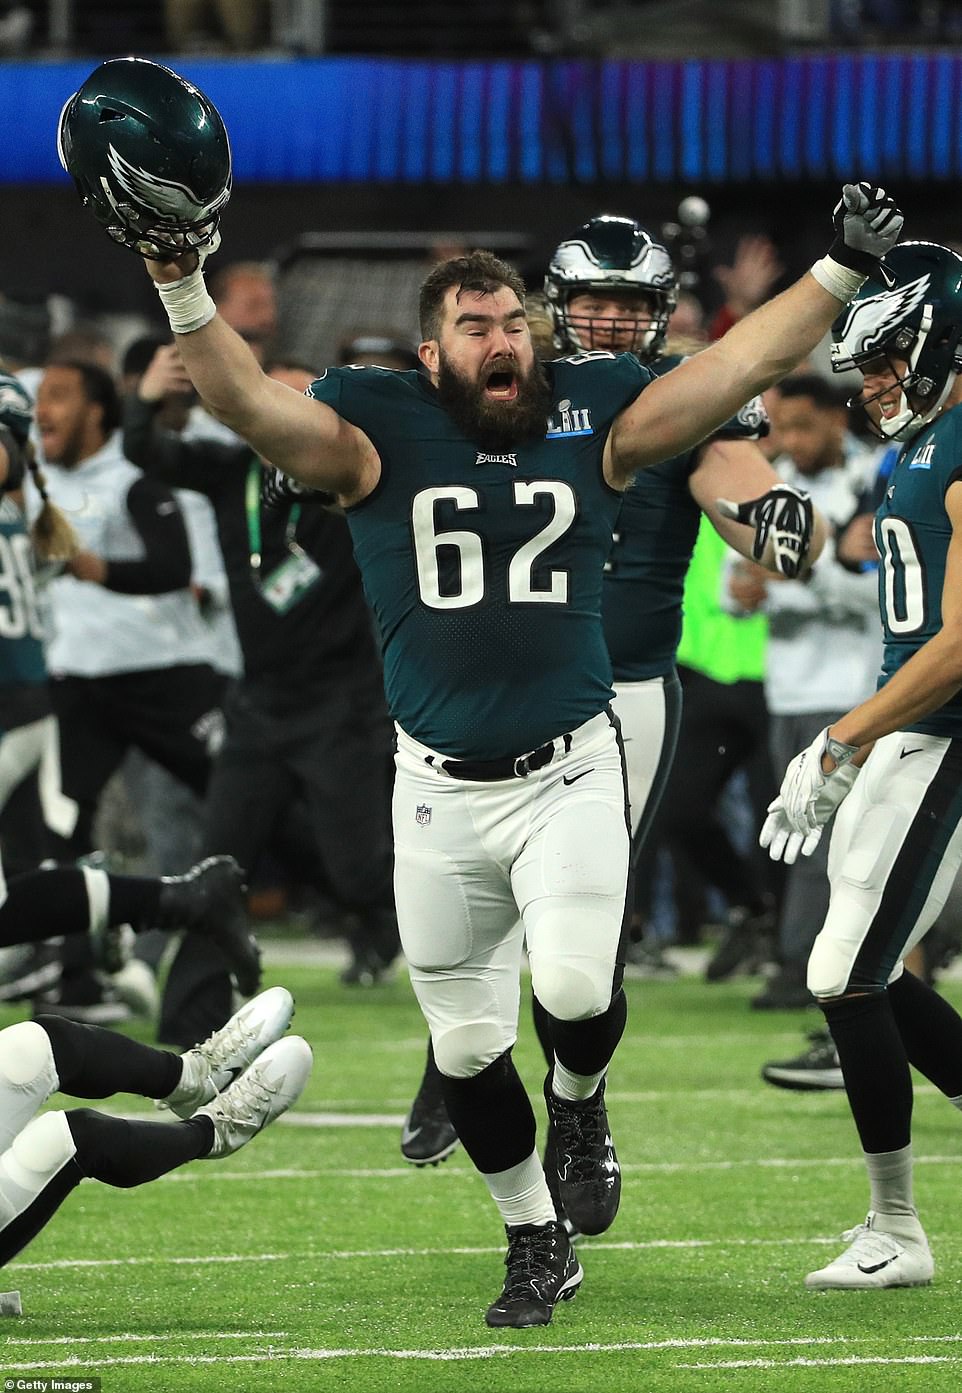 In 2017, Kelce and the Eagles won the Super Bowl by defeating the New England Patriots, 41-33. Kelce joined the celebrations as the team won its first title in the Super Bowl era.